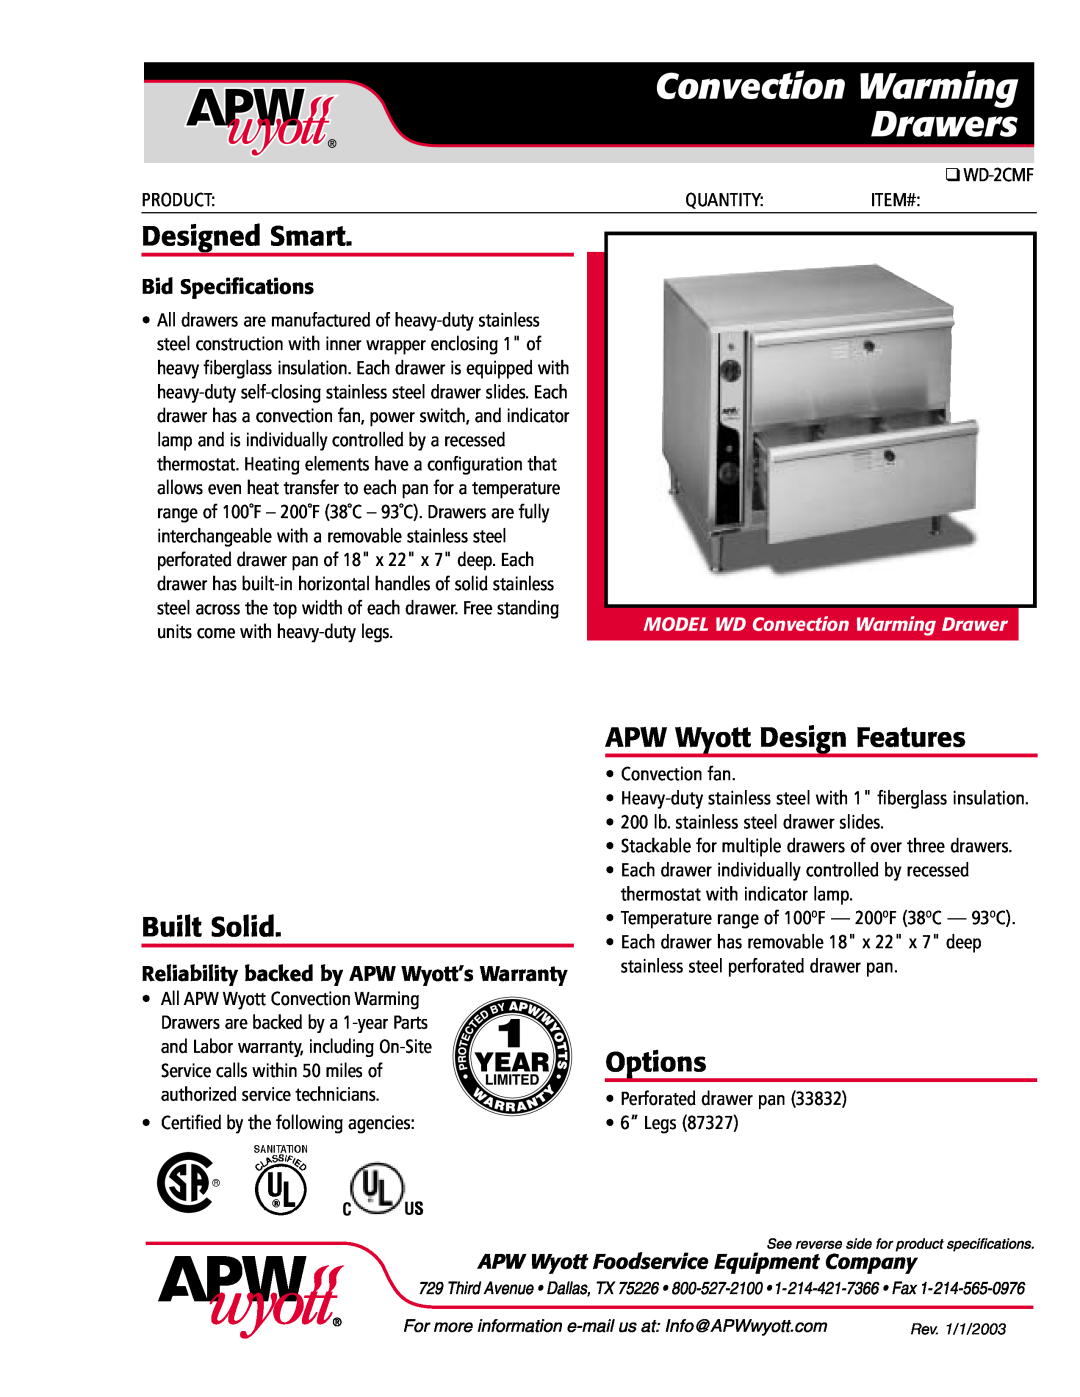 APW Wyott WD-2CMF specifications Convection Warming Drawers, Bid Specifications, Designed Smart, Built Solid, Options 